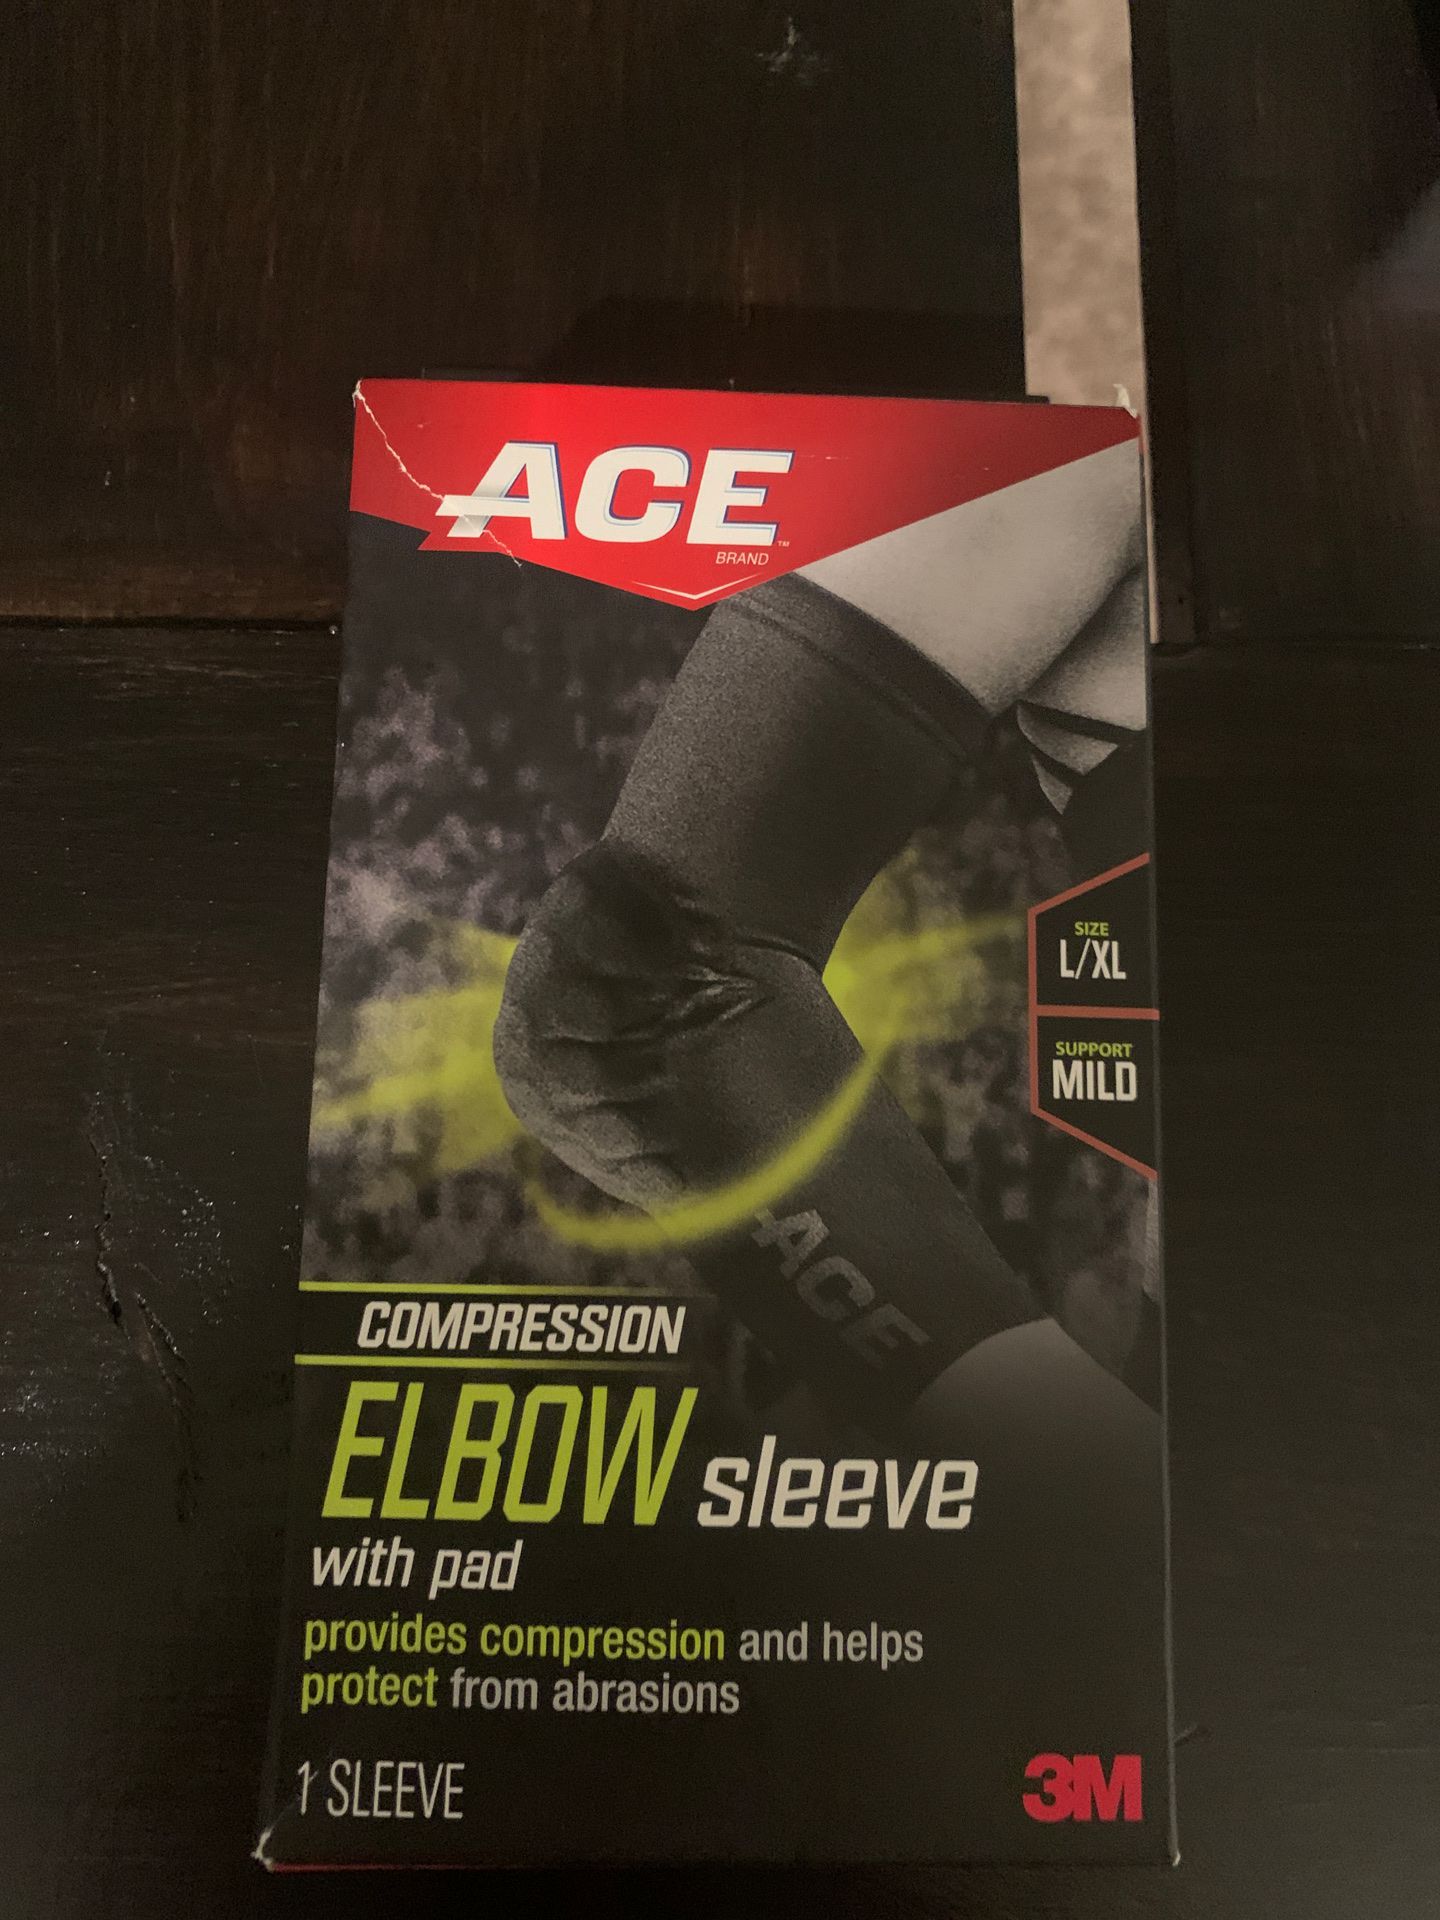 Elbow sleeve with pads